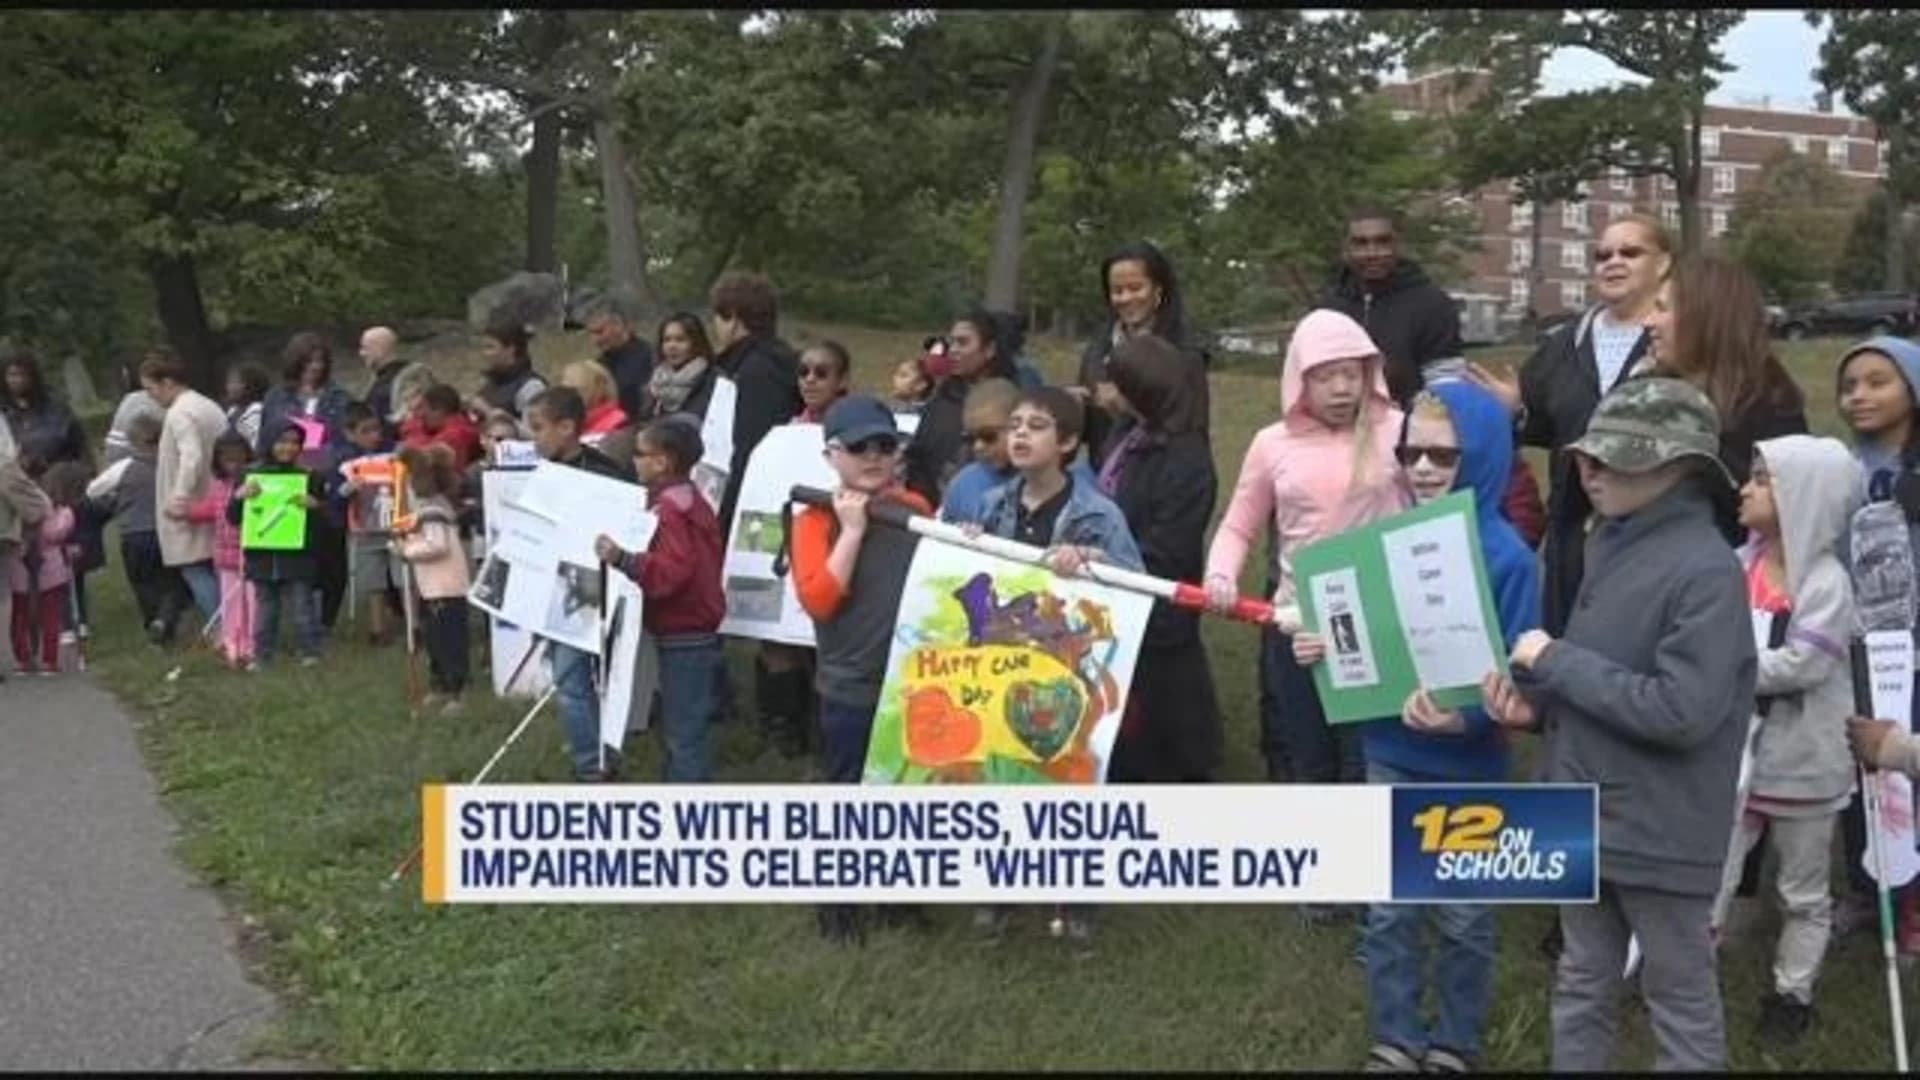 Students with visual impairments celebrate 'White Cane Day'